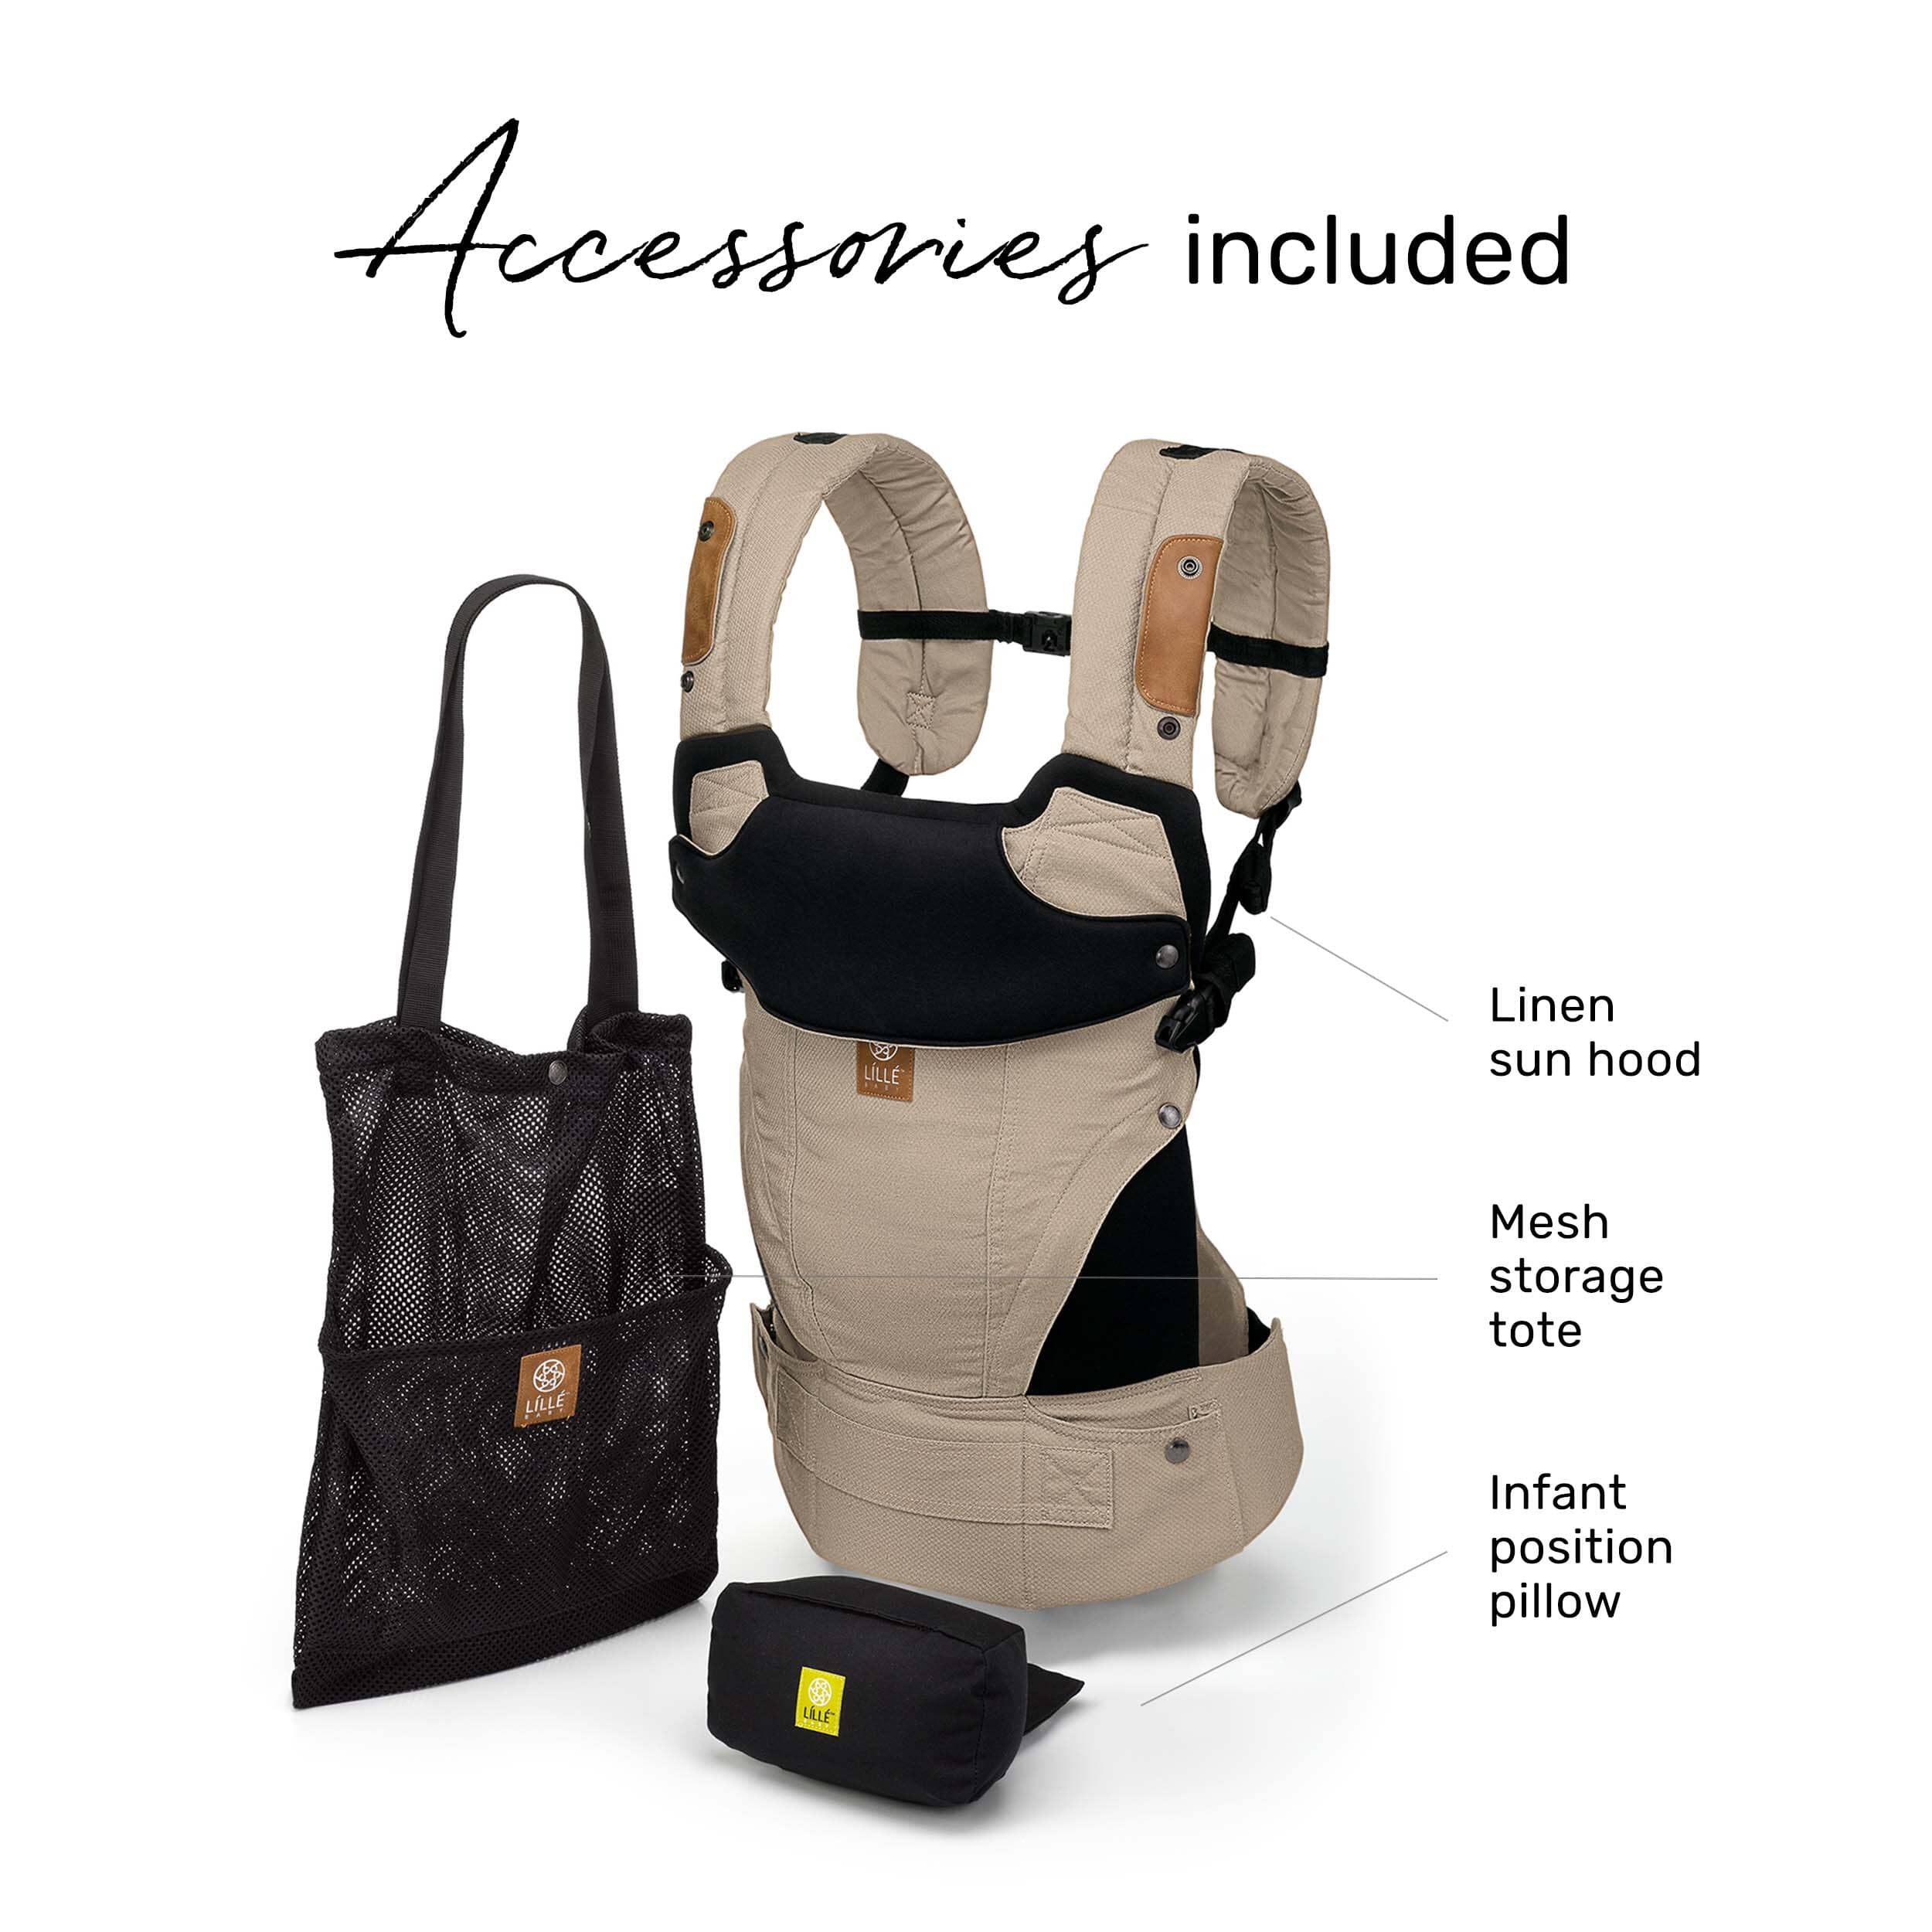 Elevate accessories included with purchase of a carrier. Pictured carrier, linen sun hood, mesh storage tote and infant position pillow. 